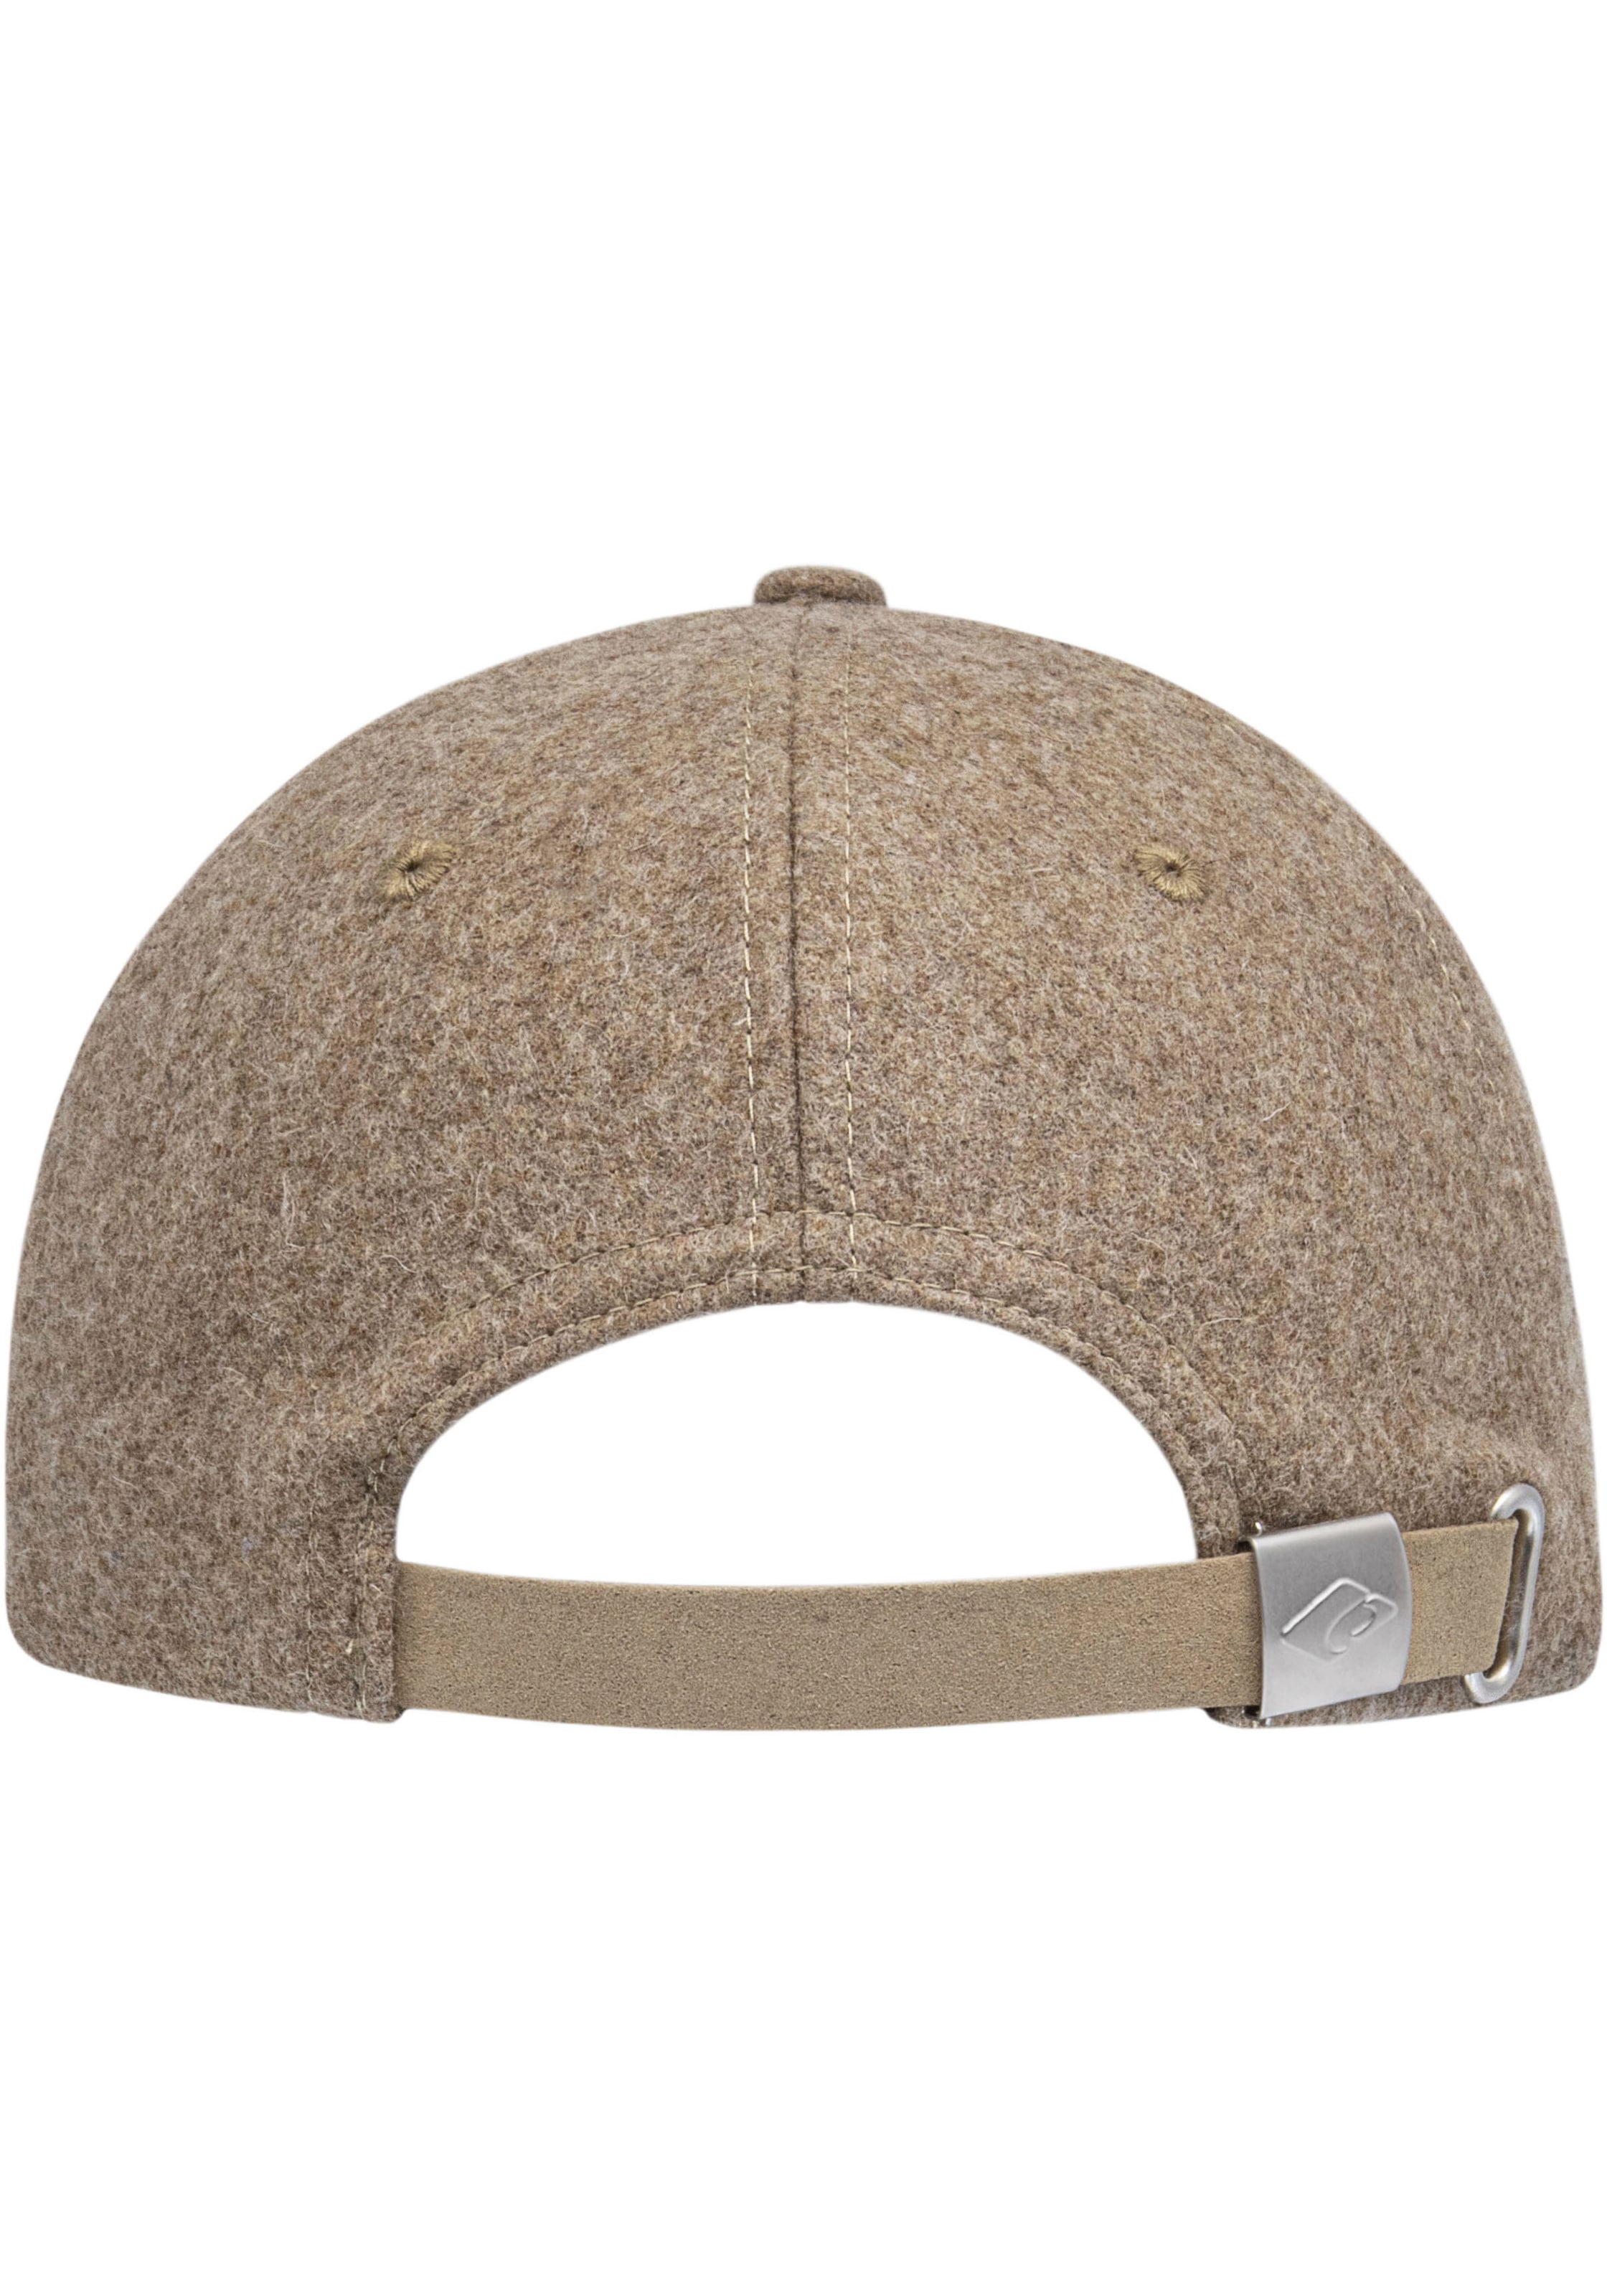 chillouts Baseball Cap »Mateo Hat«, Wasserabweisendes Material bei